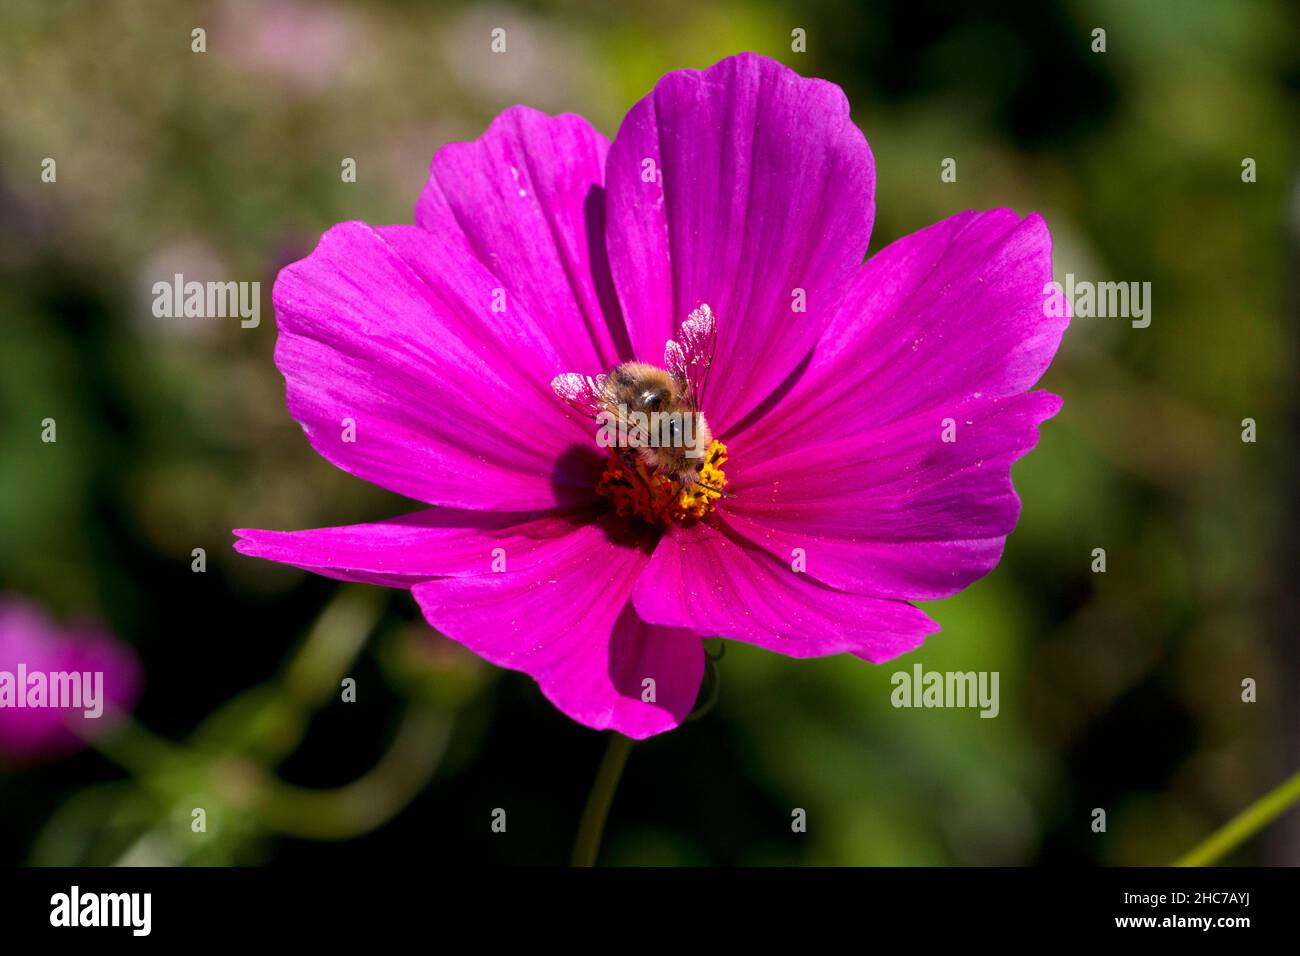 A single purple cosmos flower in full bloom with a honey bee pollinating in a garden in Nanaimo, Vancouver Island, BC, Canada in July Stock Photo